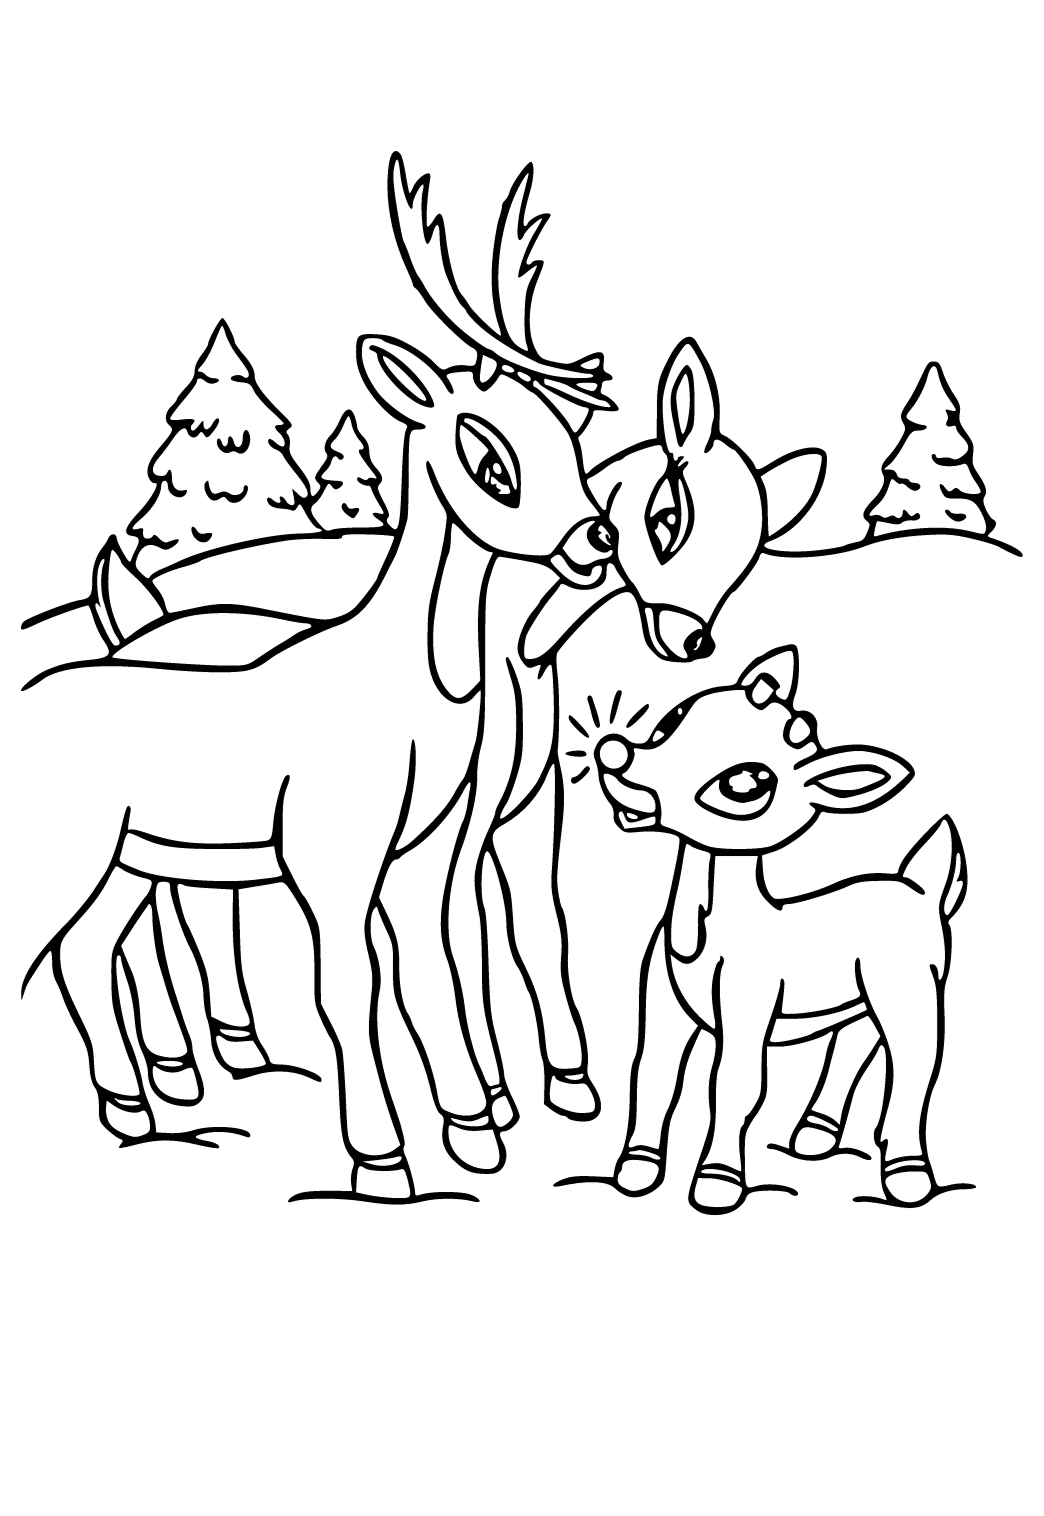 Free printable rudolph the red nosed reindeer family coloring page for adults and kids